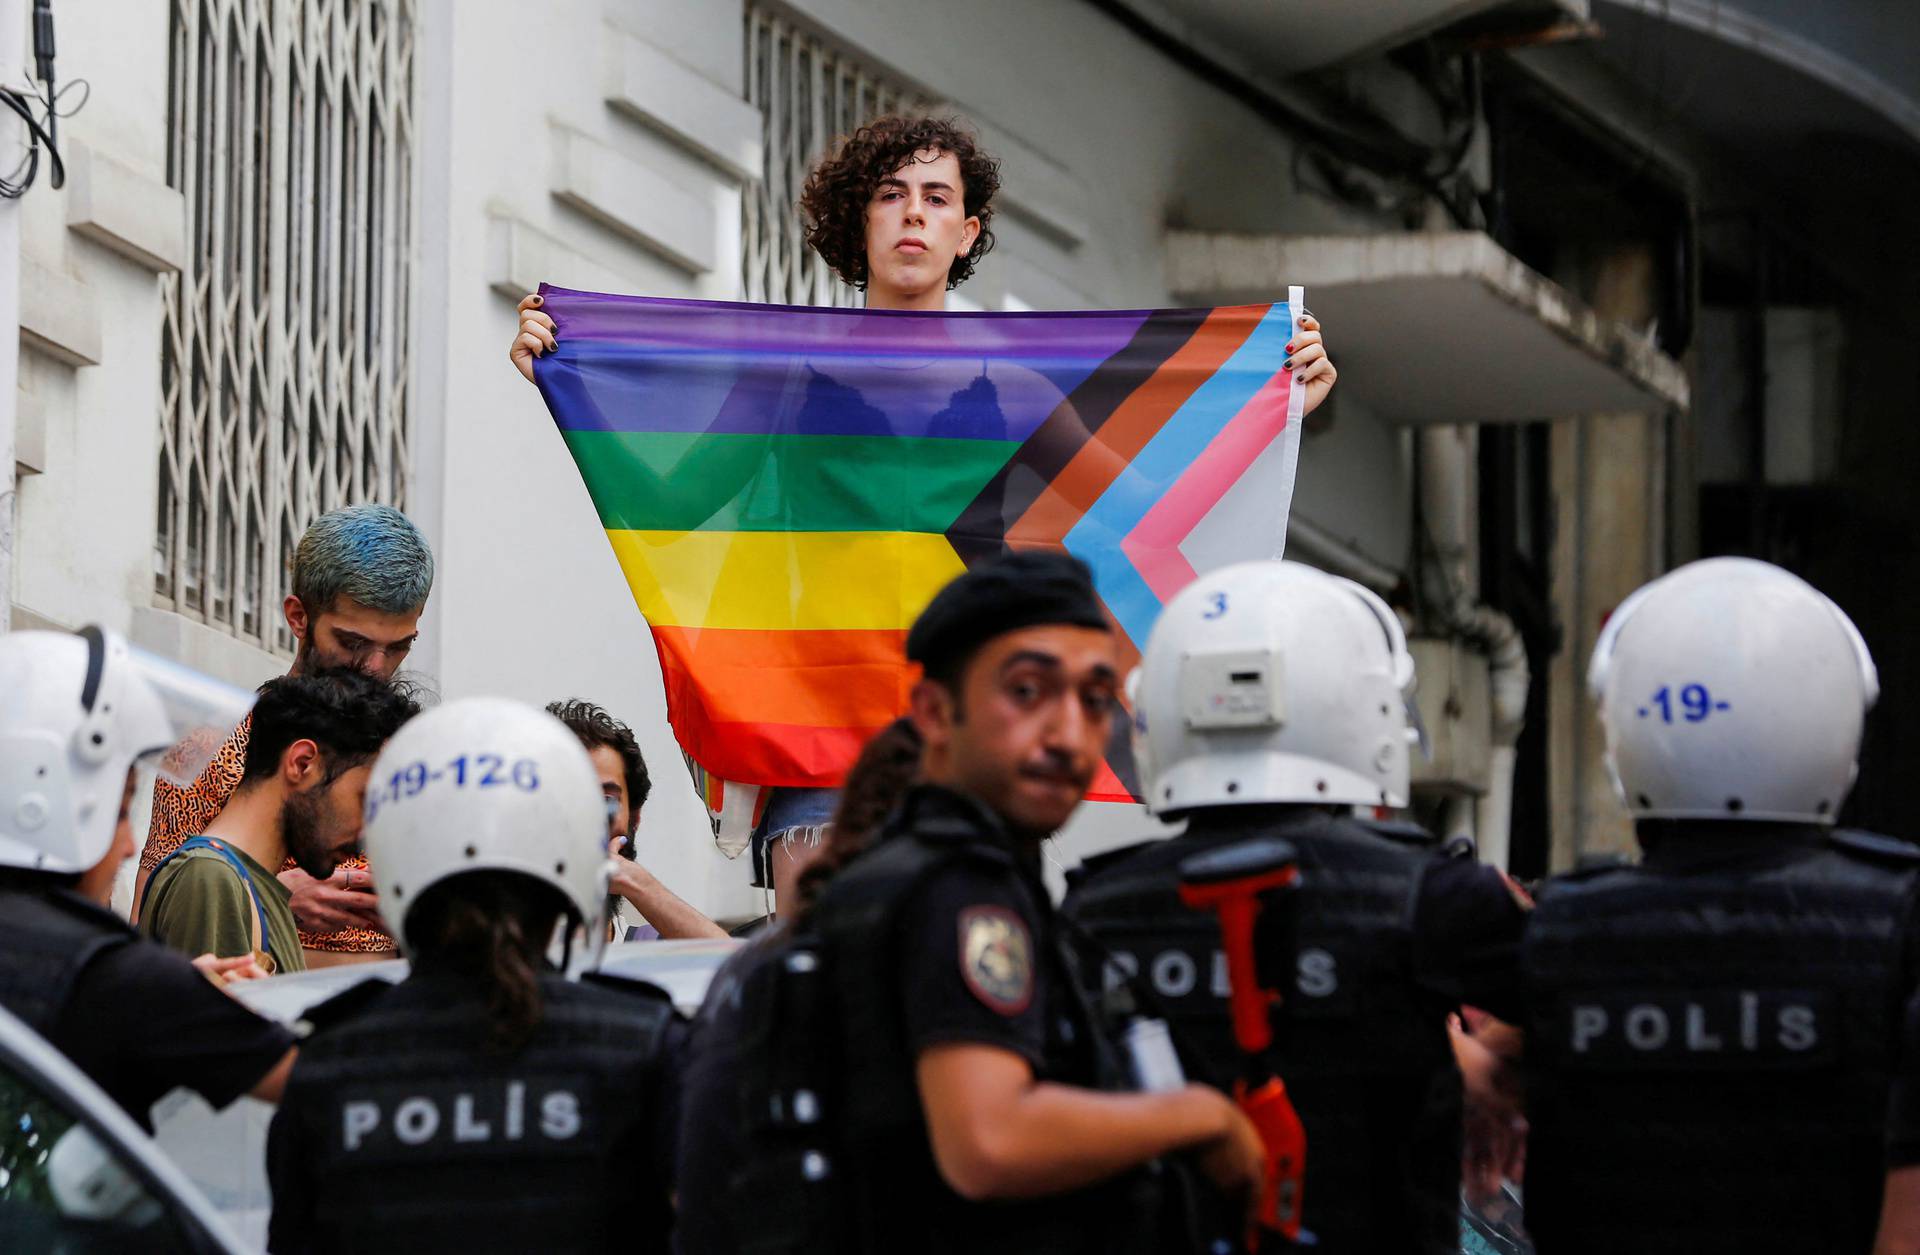 Demonstrators march as they try to gather for a pride parade in Istanbul